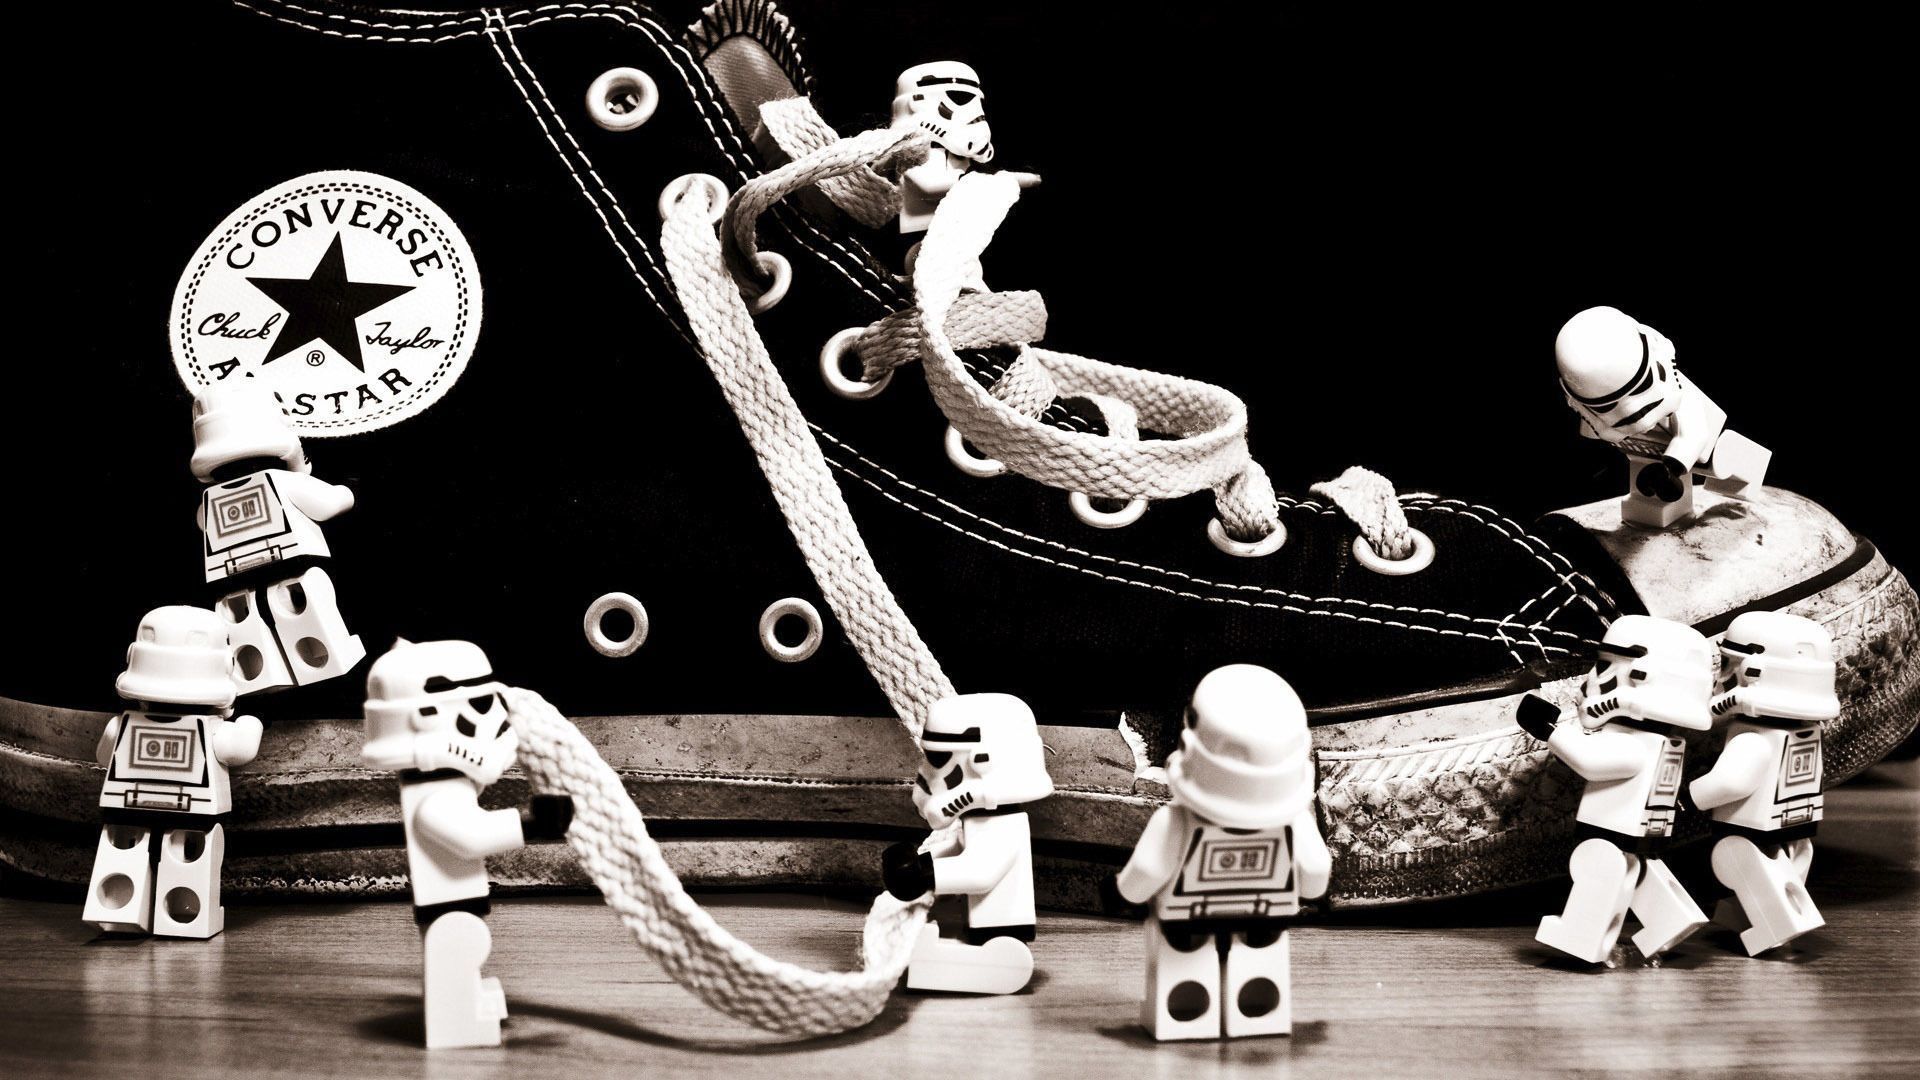 Stormtroopers playing with a sneaker wallpaper - Free Wide HD ...